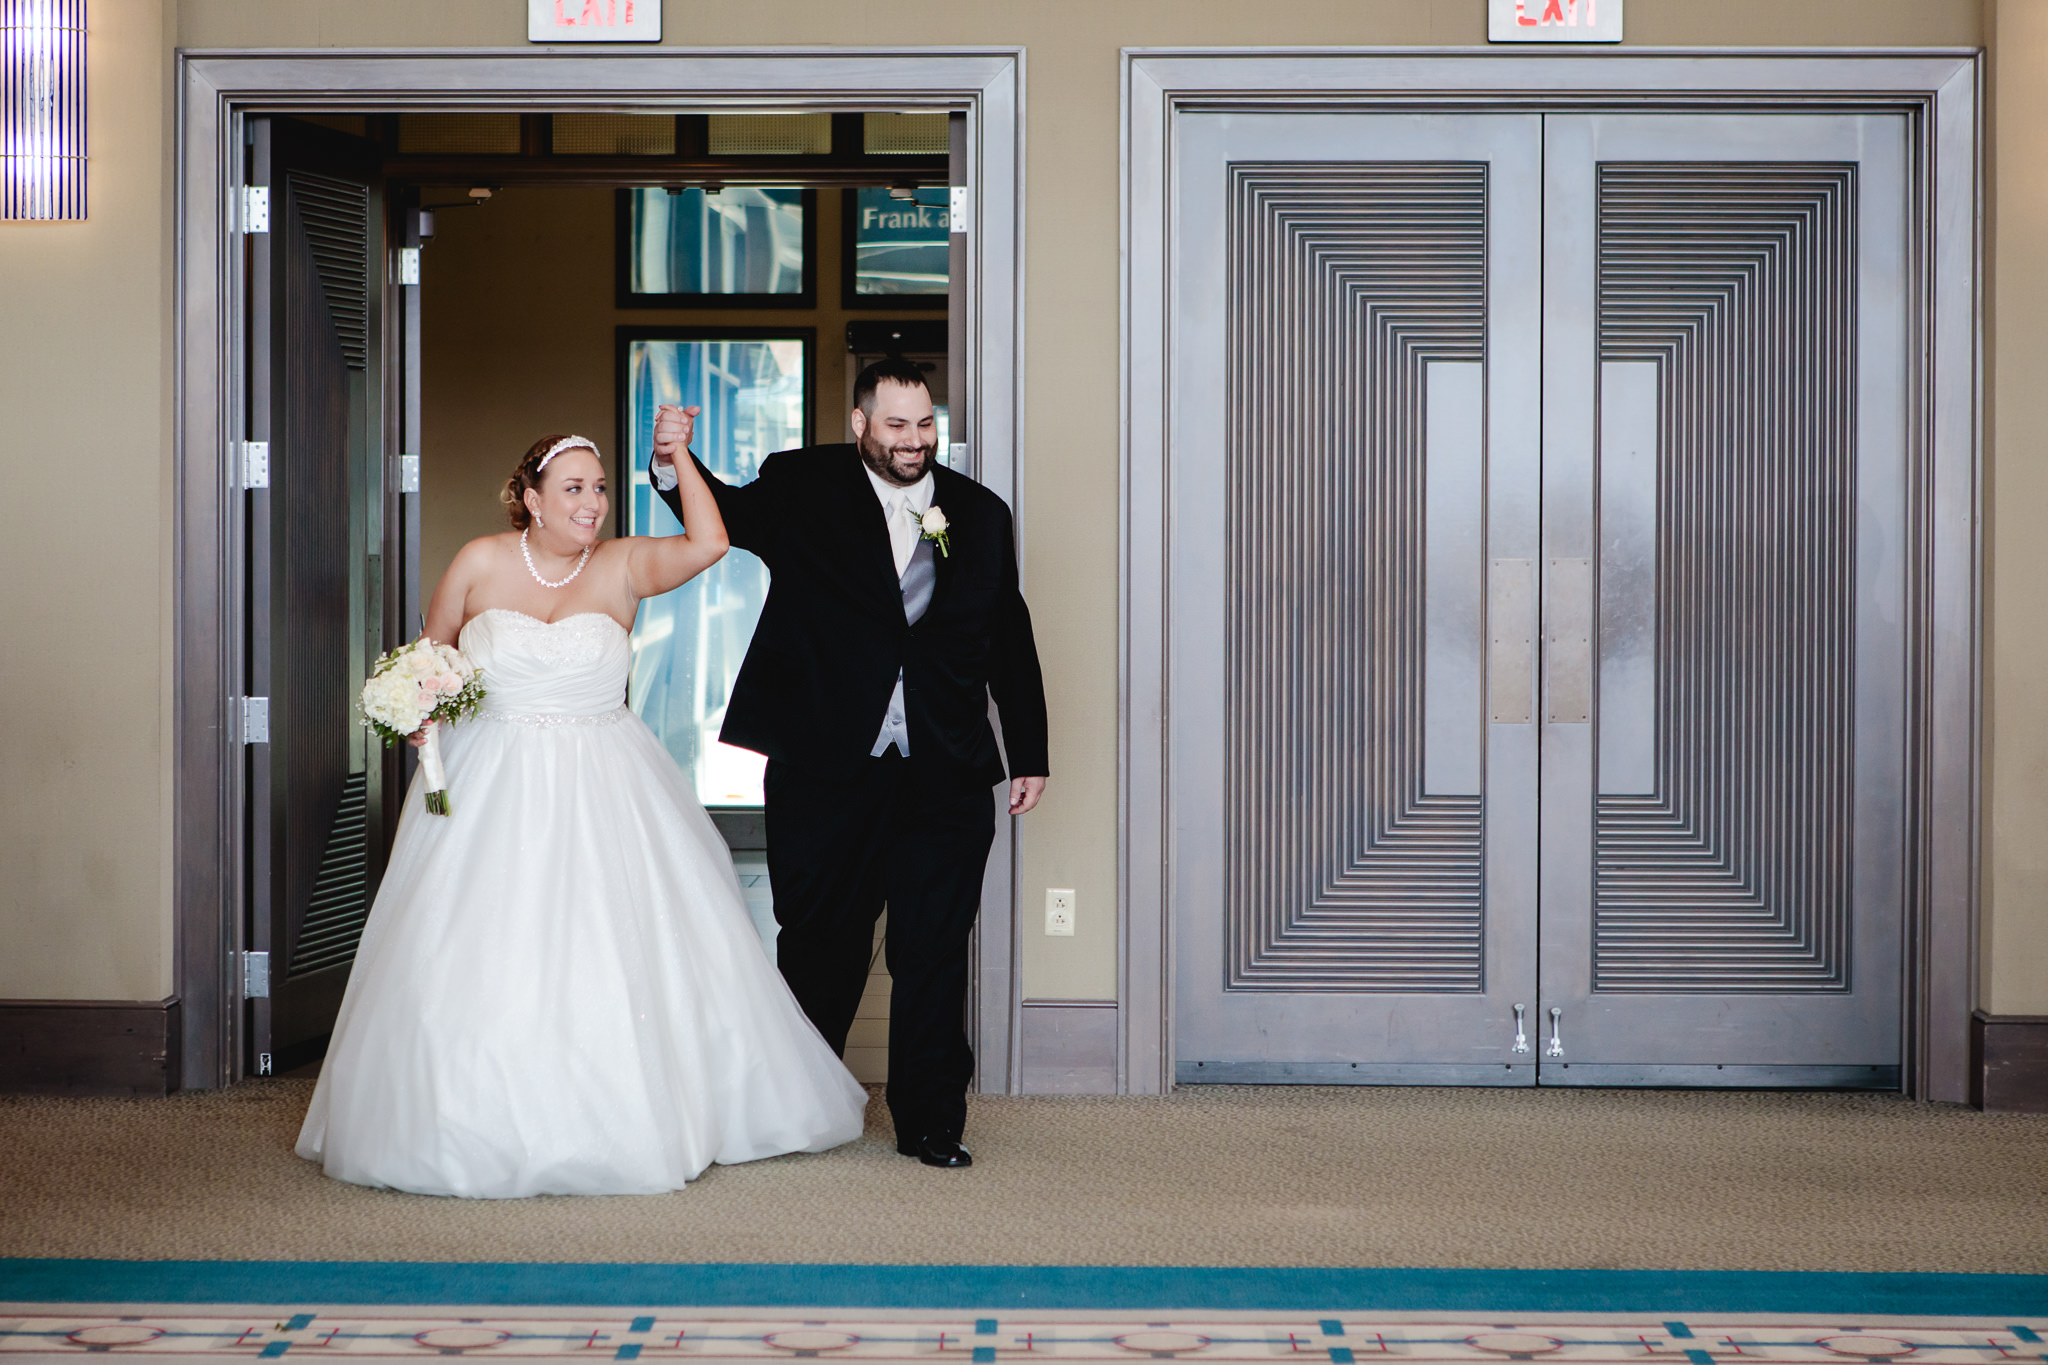 Newlyweds enter their reception at Duquesne University